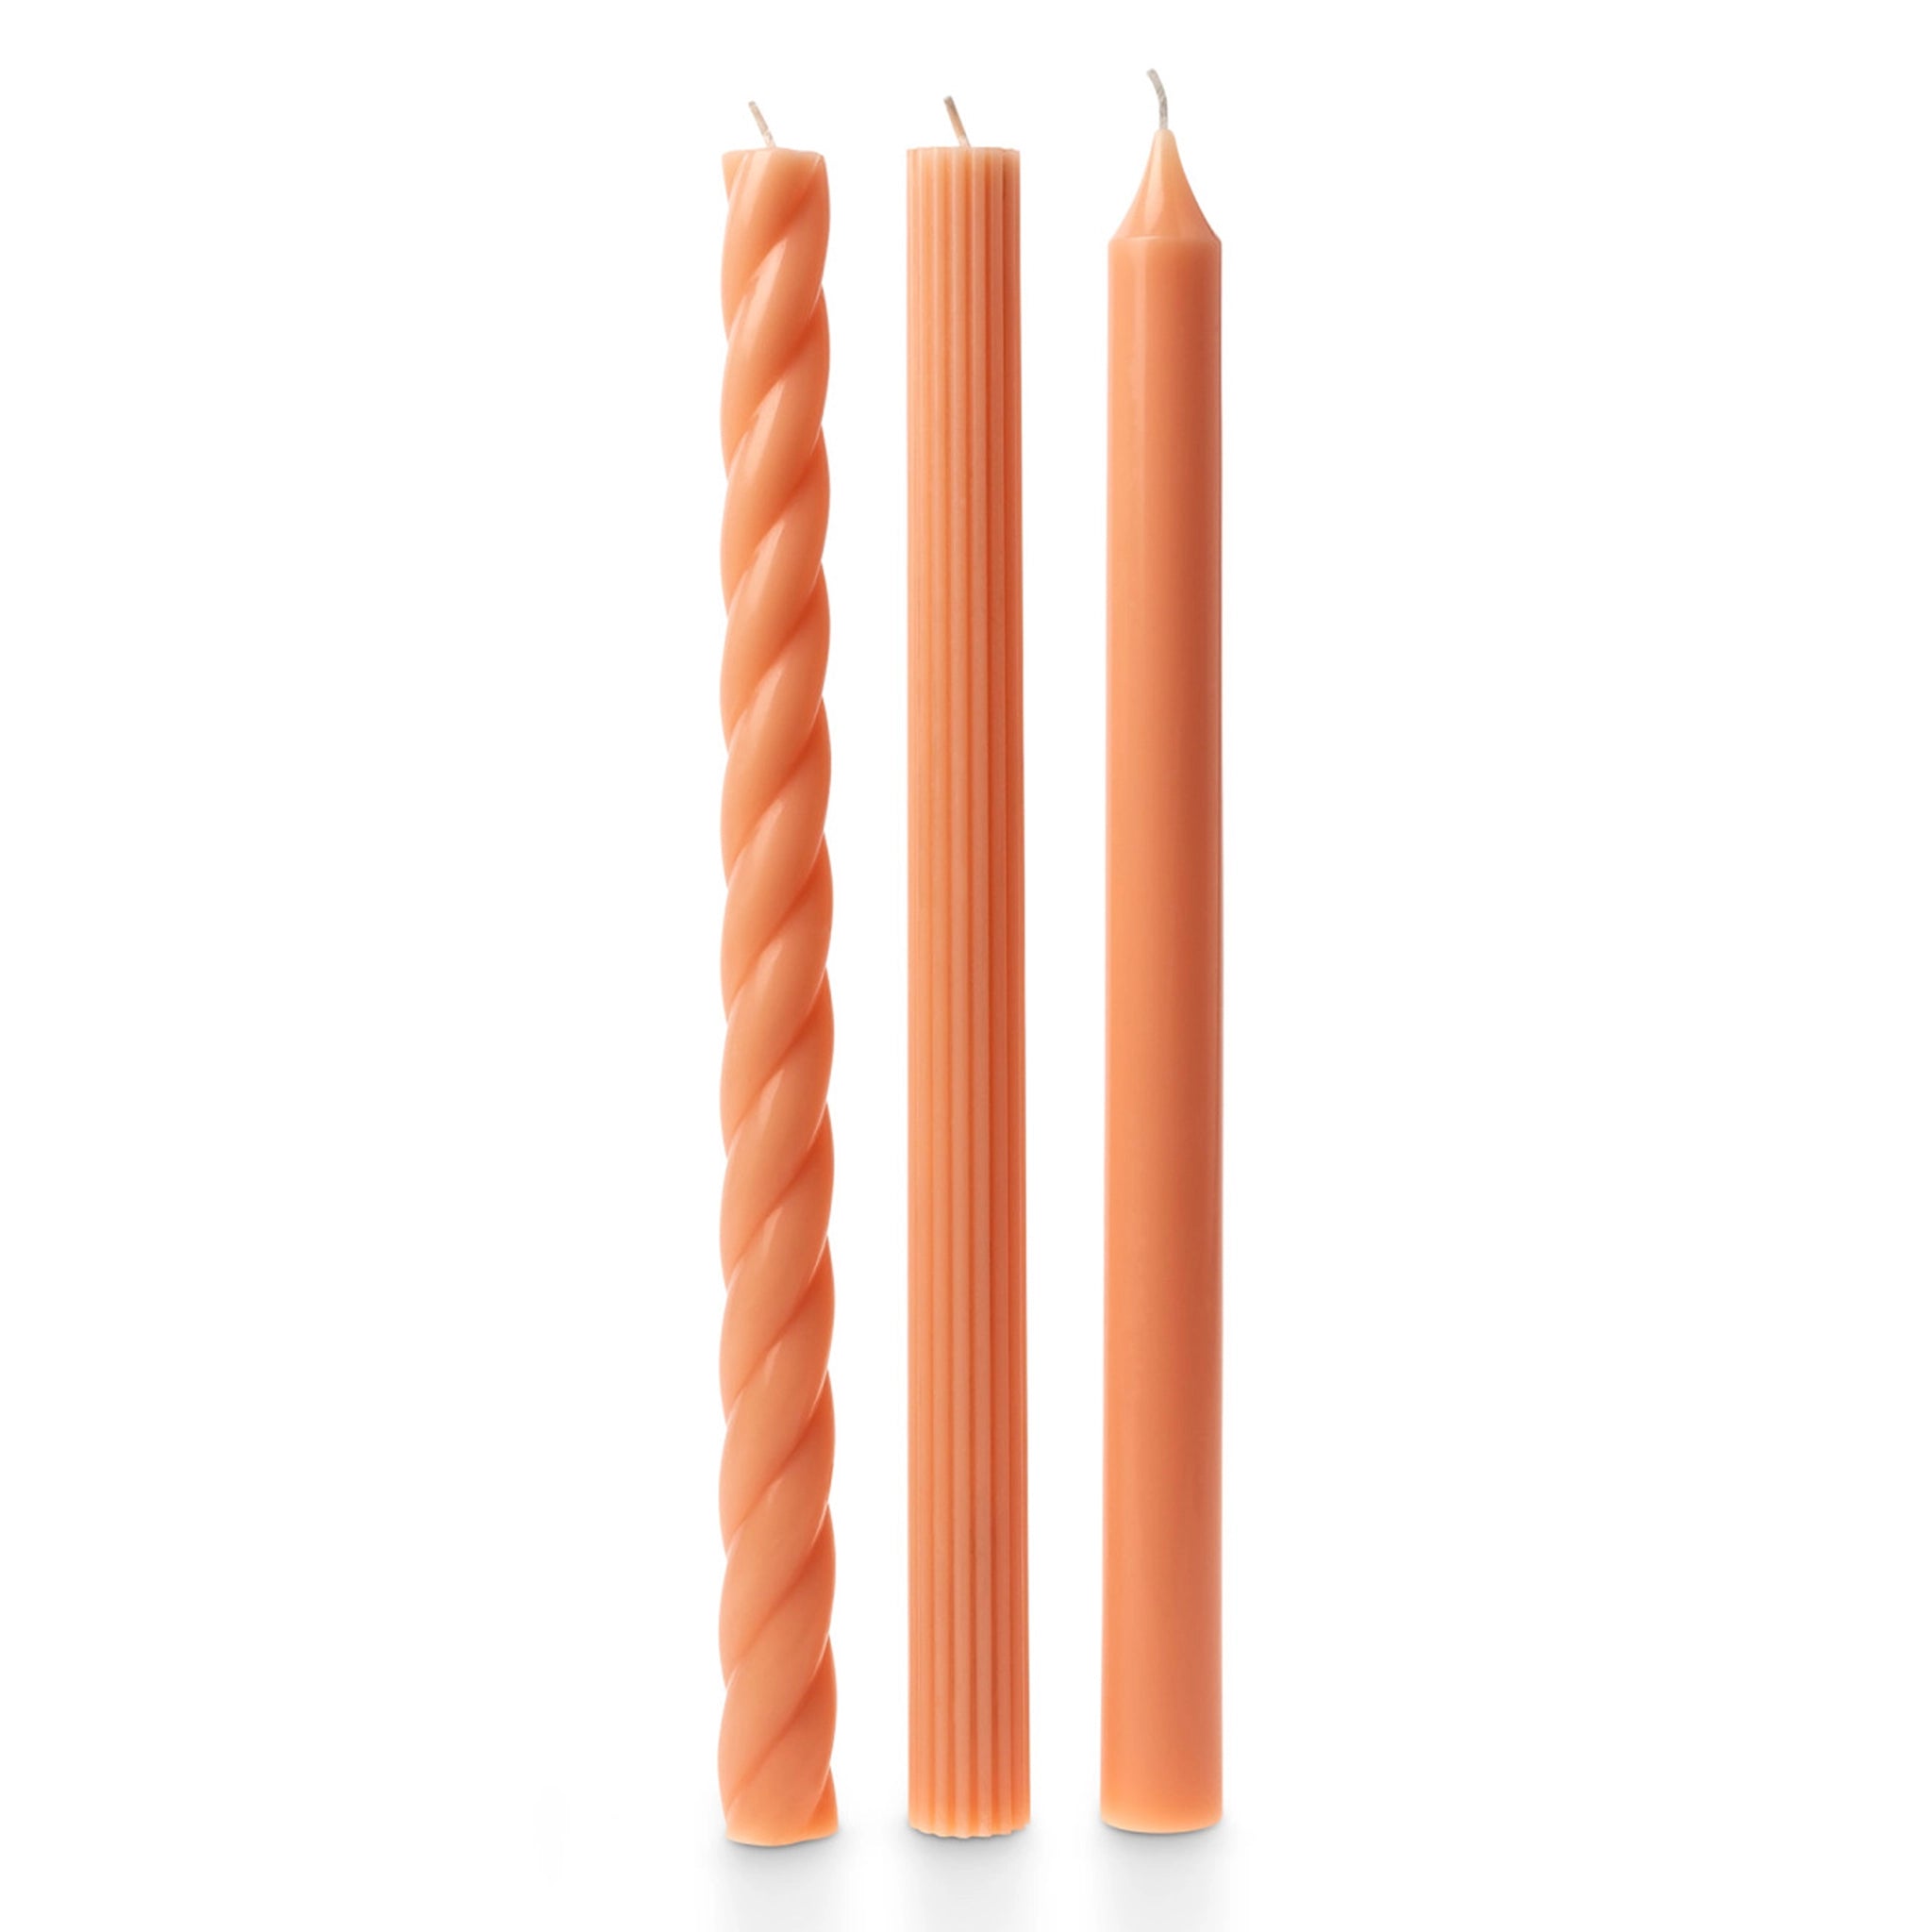 Three peach colored tapered candles, one has a twisted design, another has a vertically ribbed detail and the last candle is smooth.